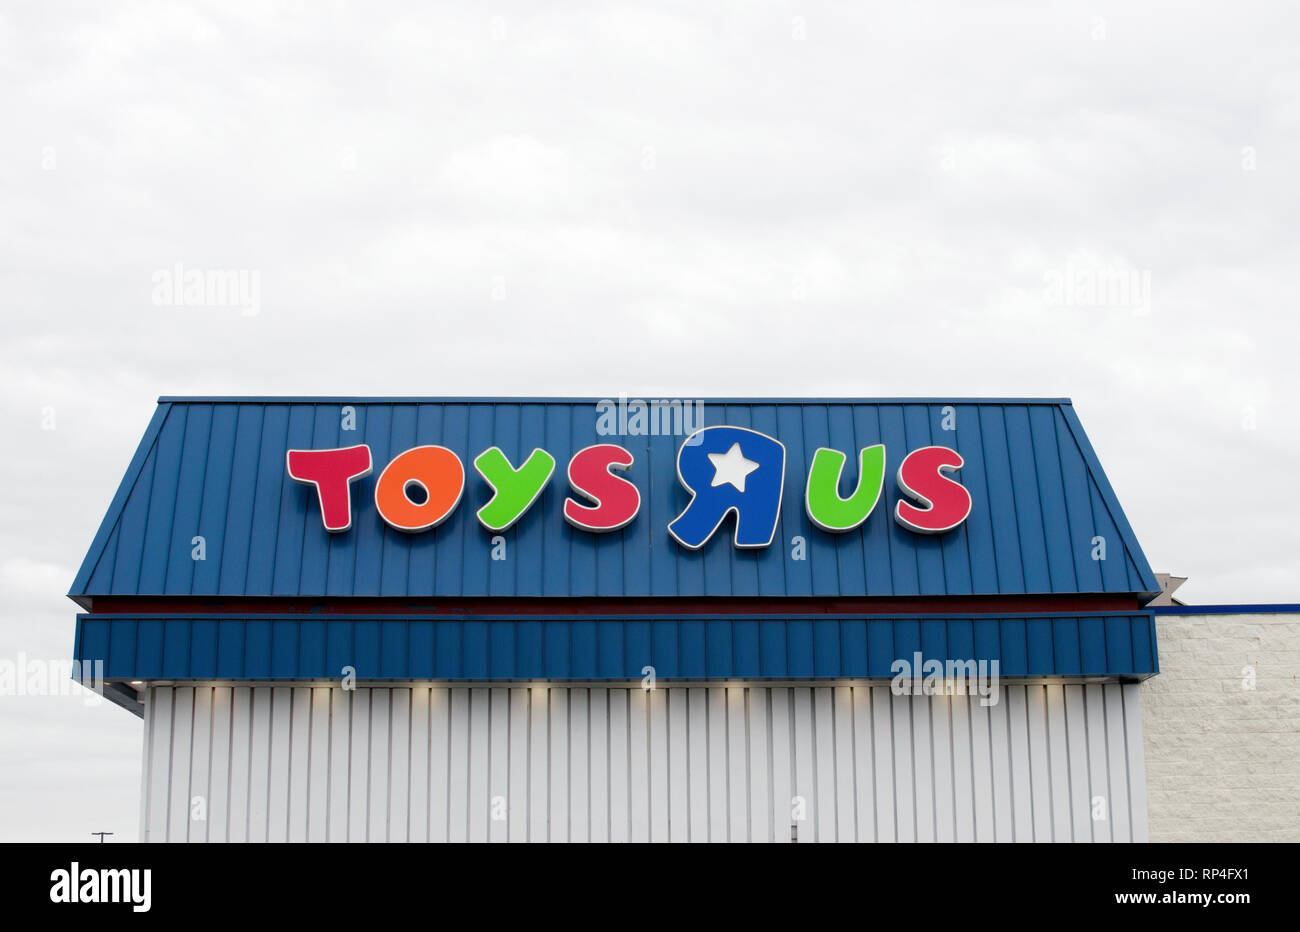 Toys R Us sign on building exterior Stock Photo